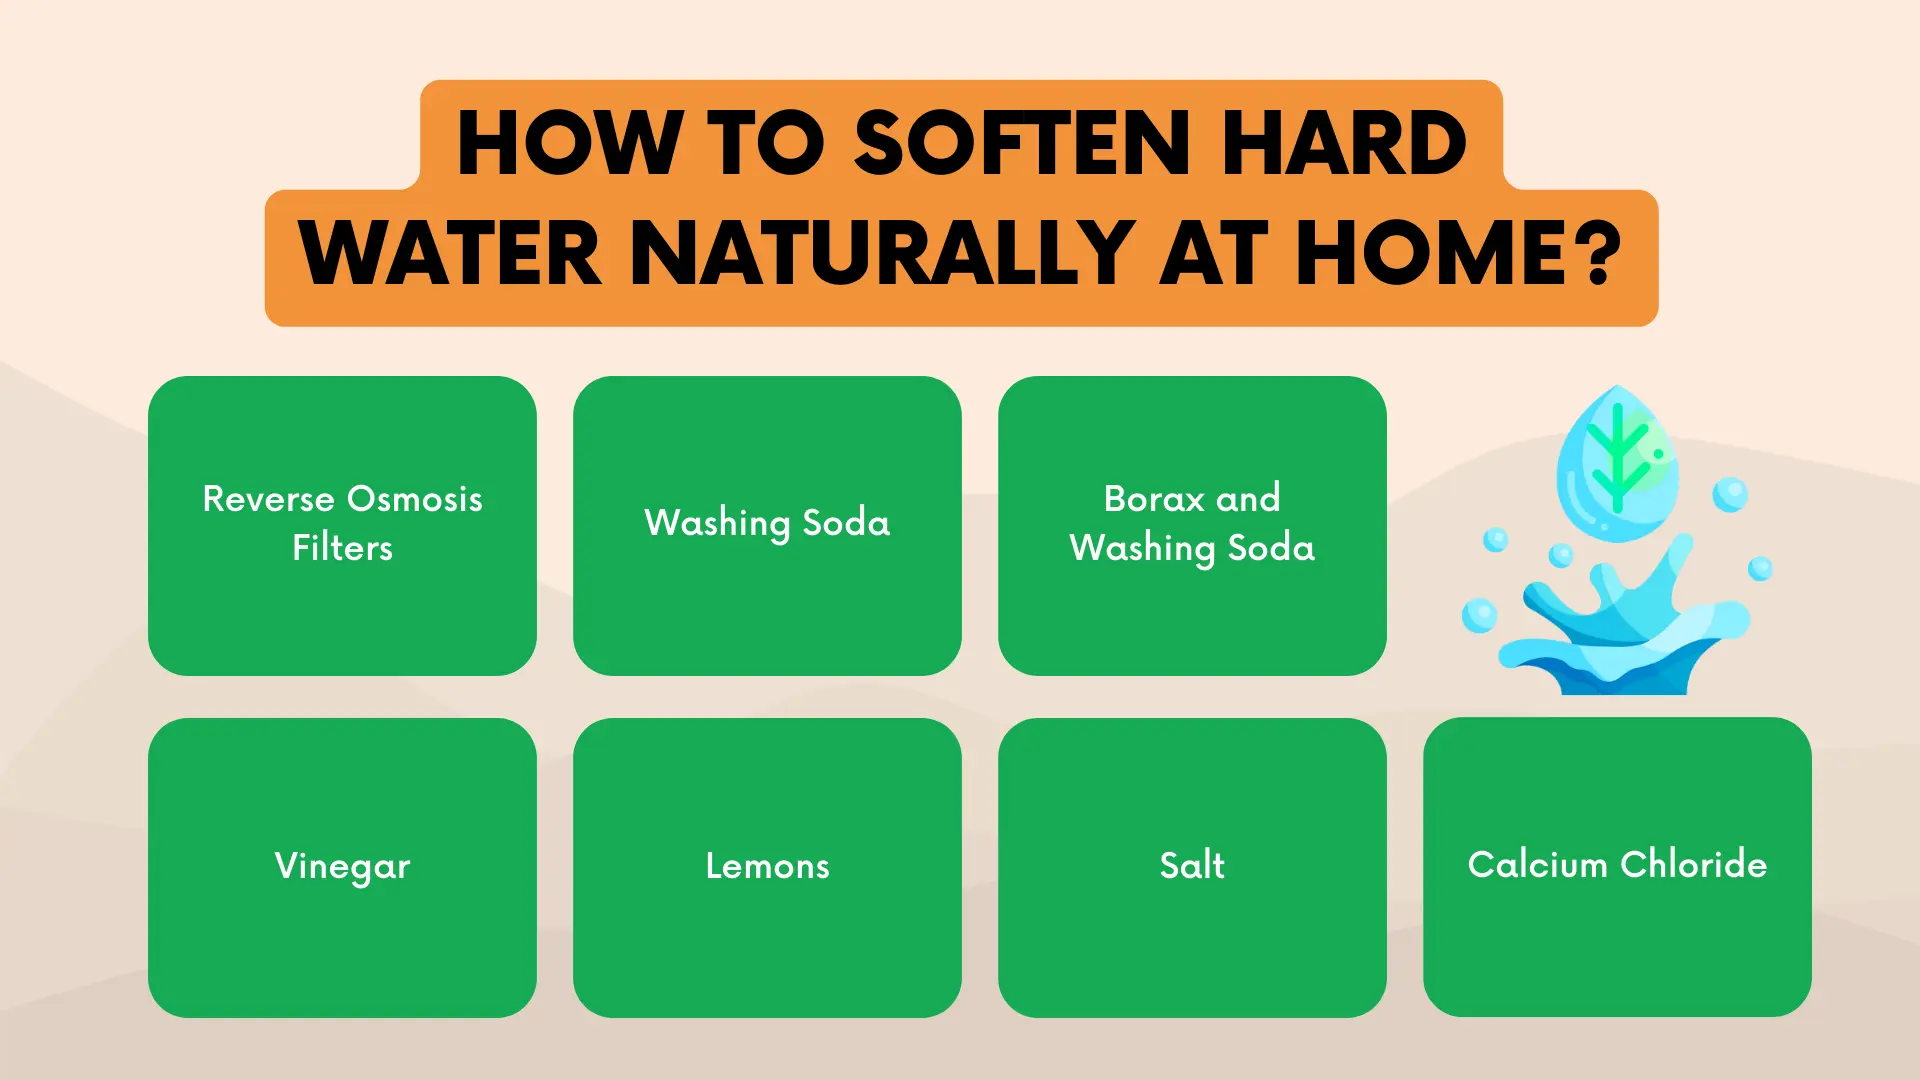 How to soften hard water naturally at home